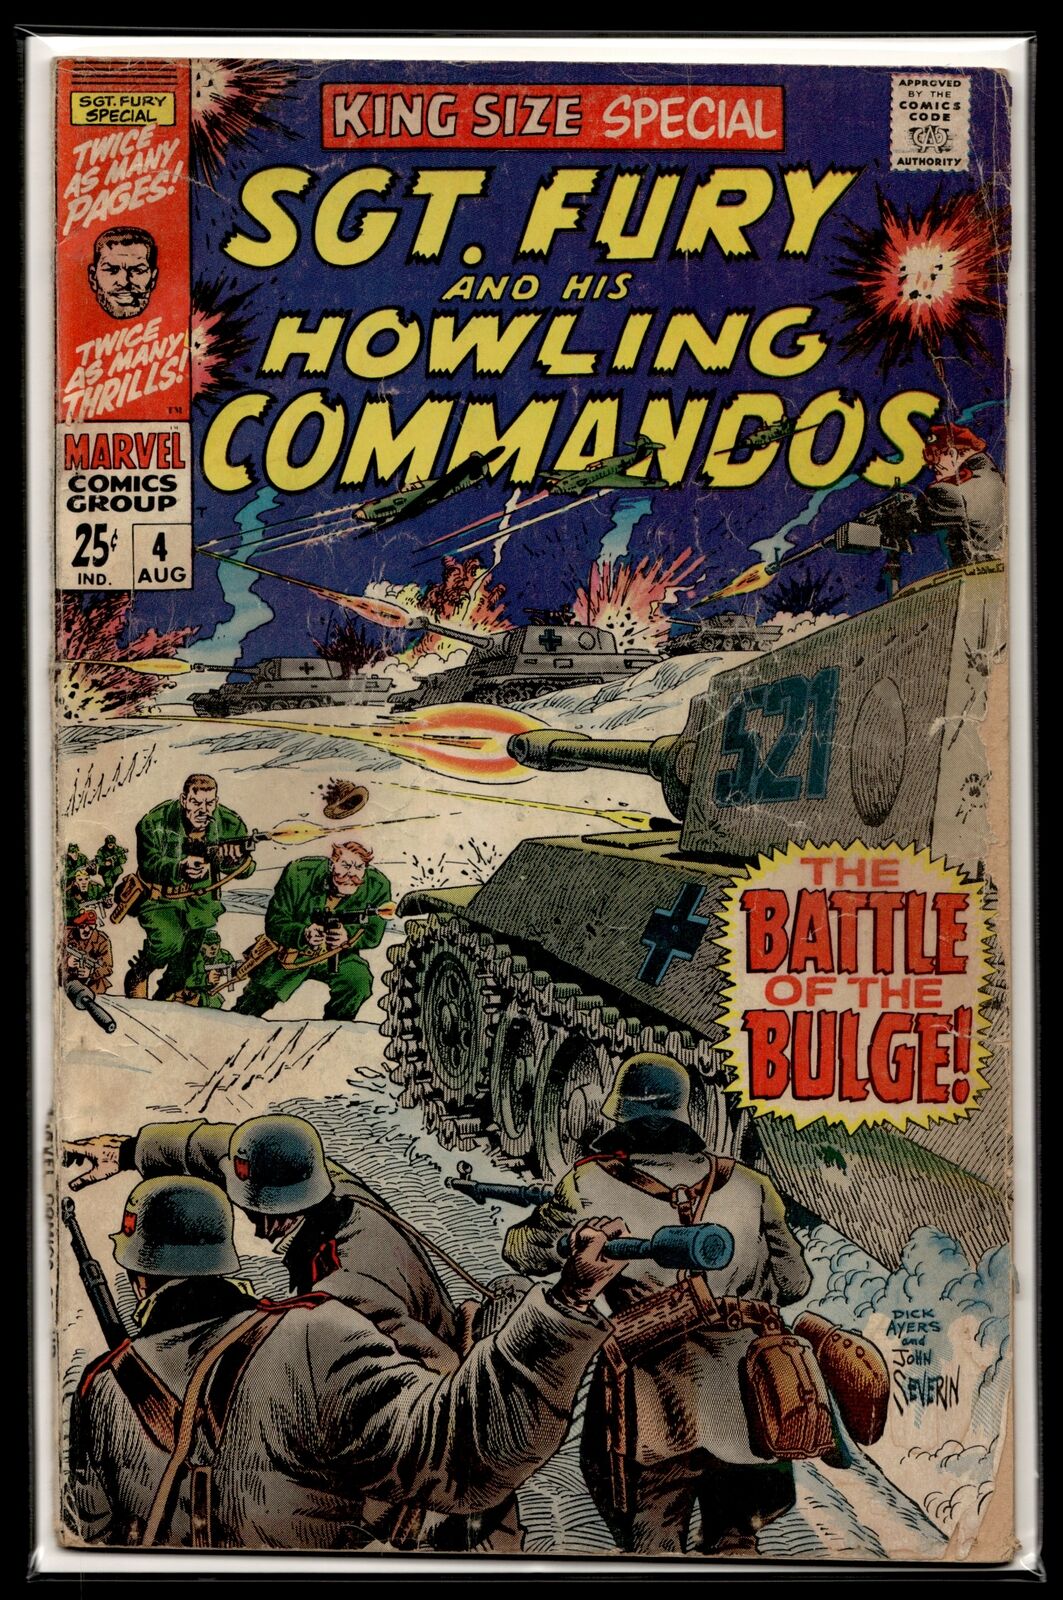 1968 Sgt. Fury and His Howling Commandos Annual #4 Marvel Comic